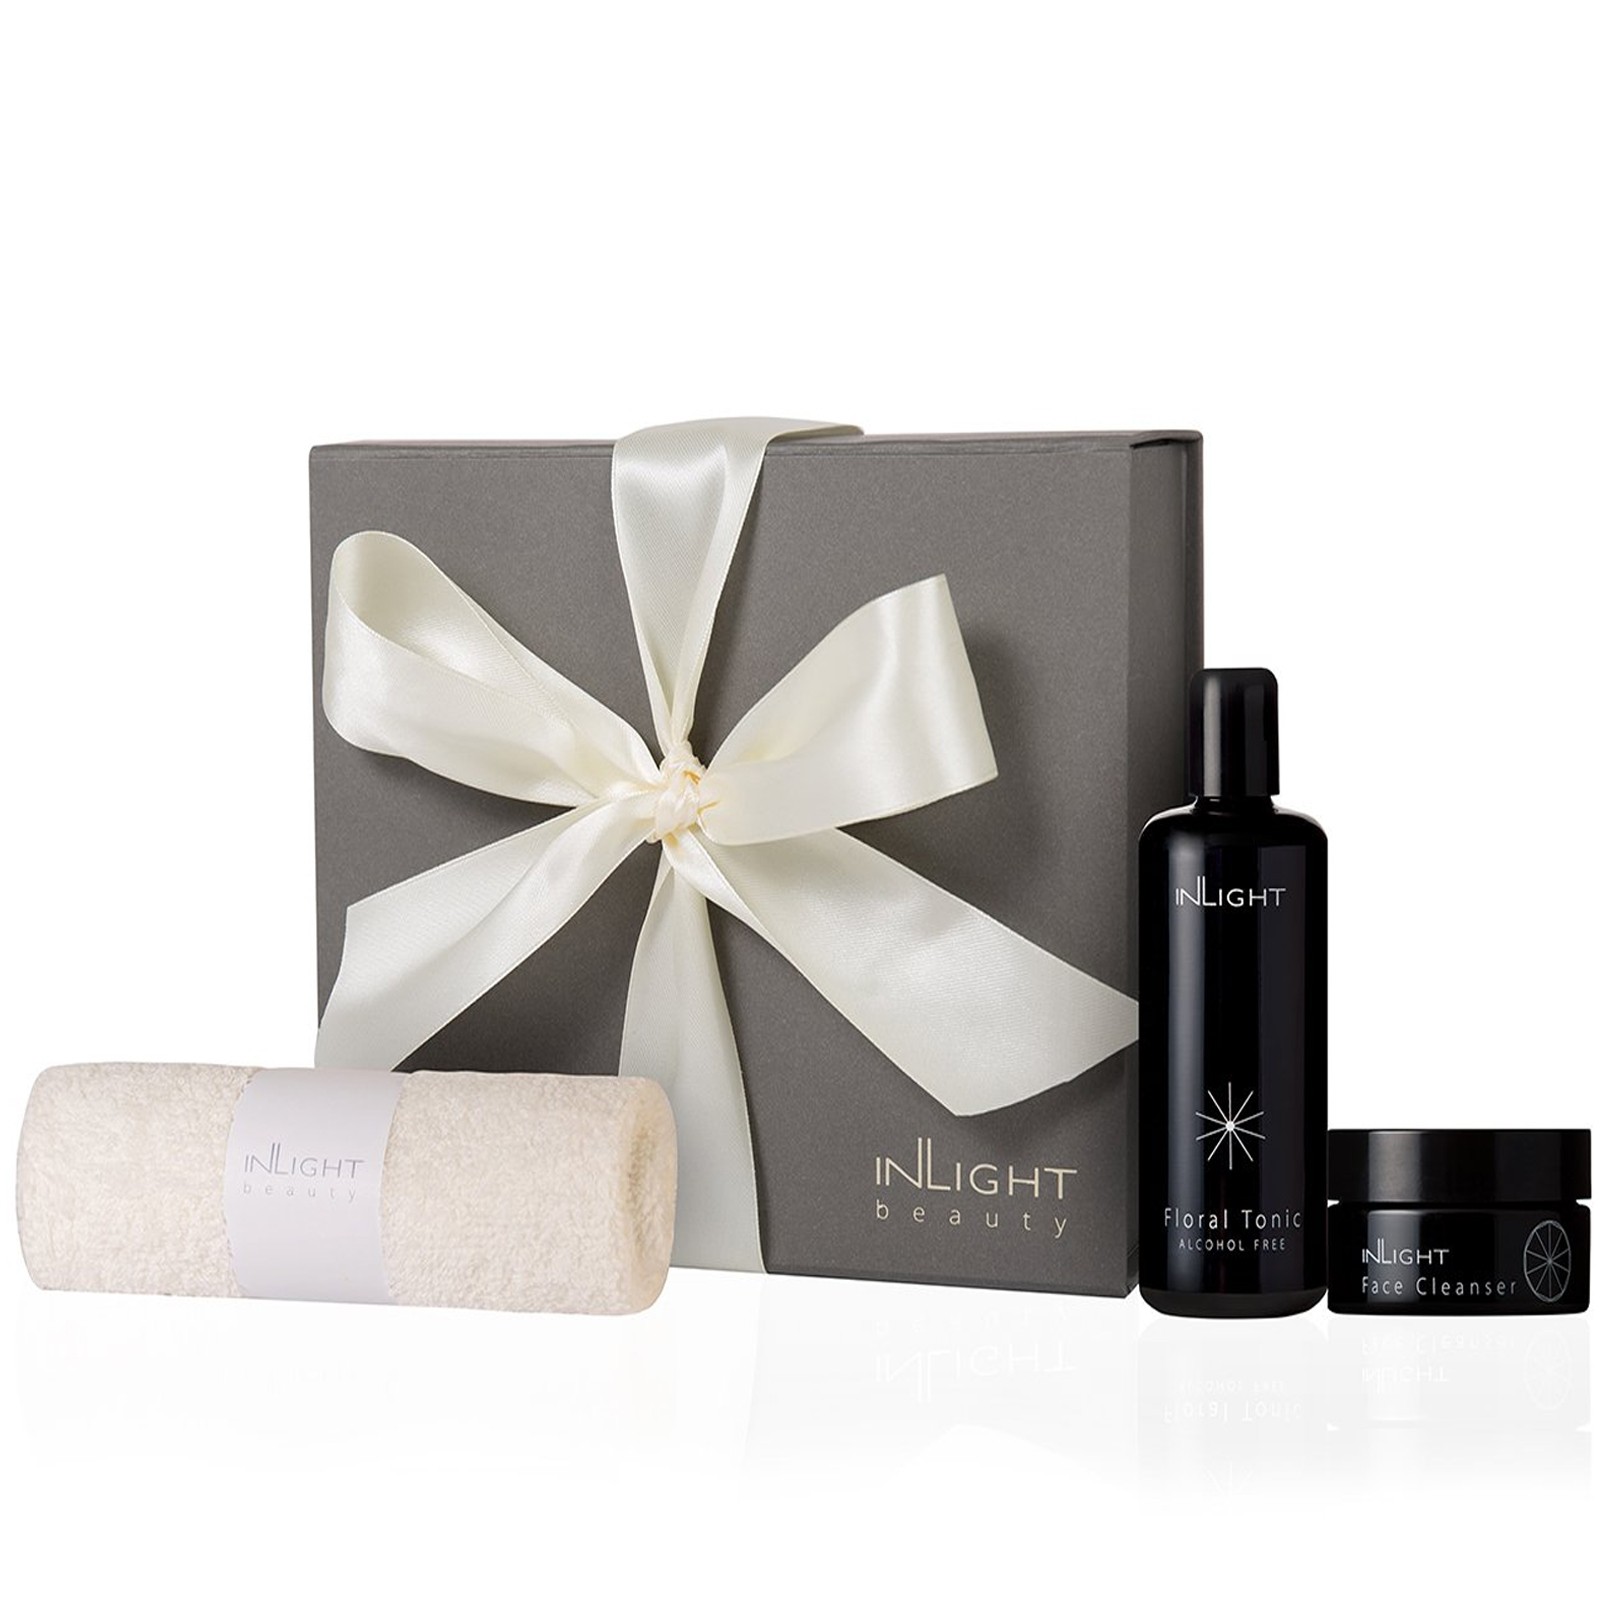 Inlight Cleanse & Tone Gift Set